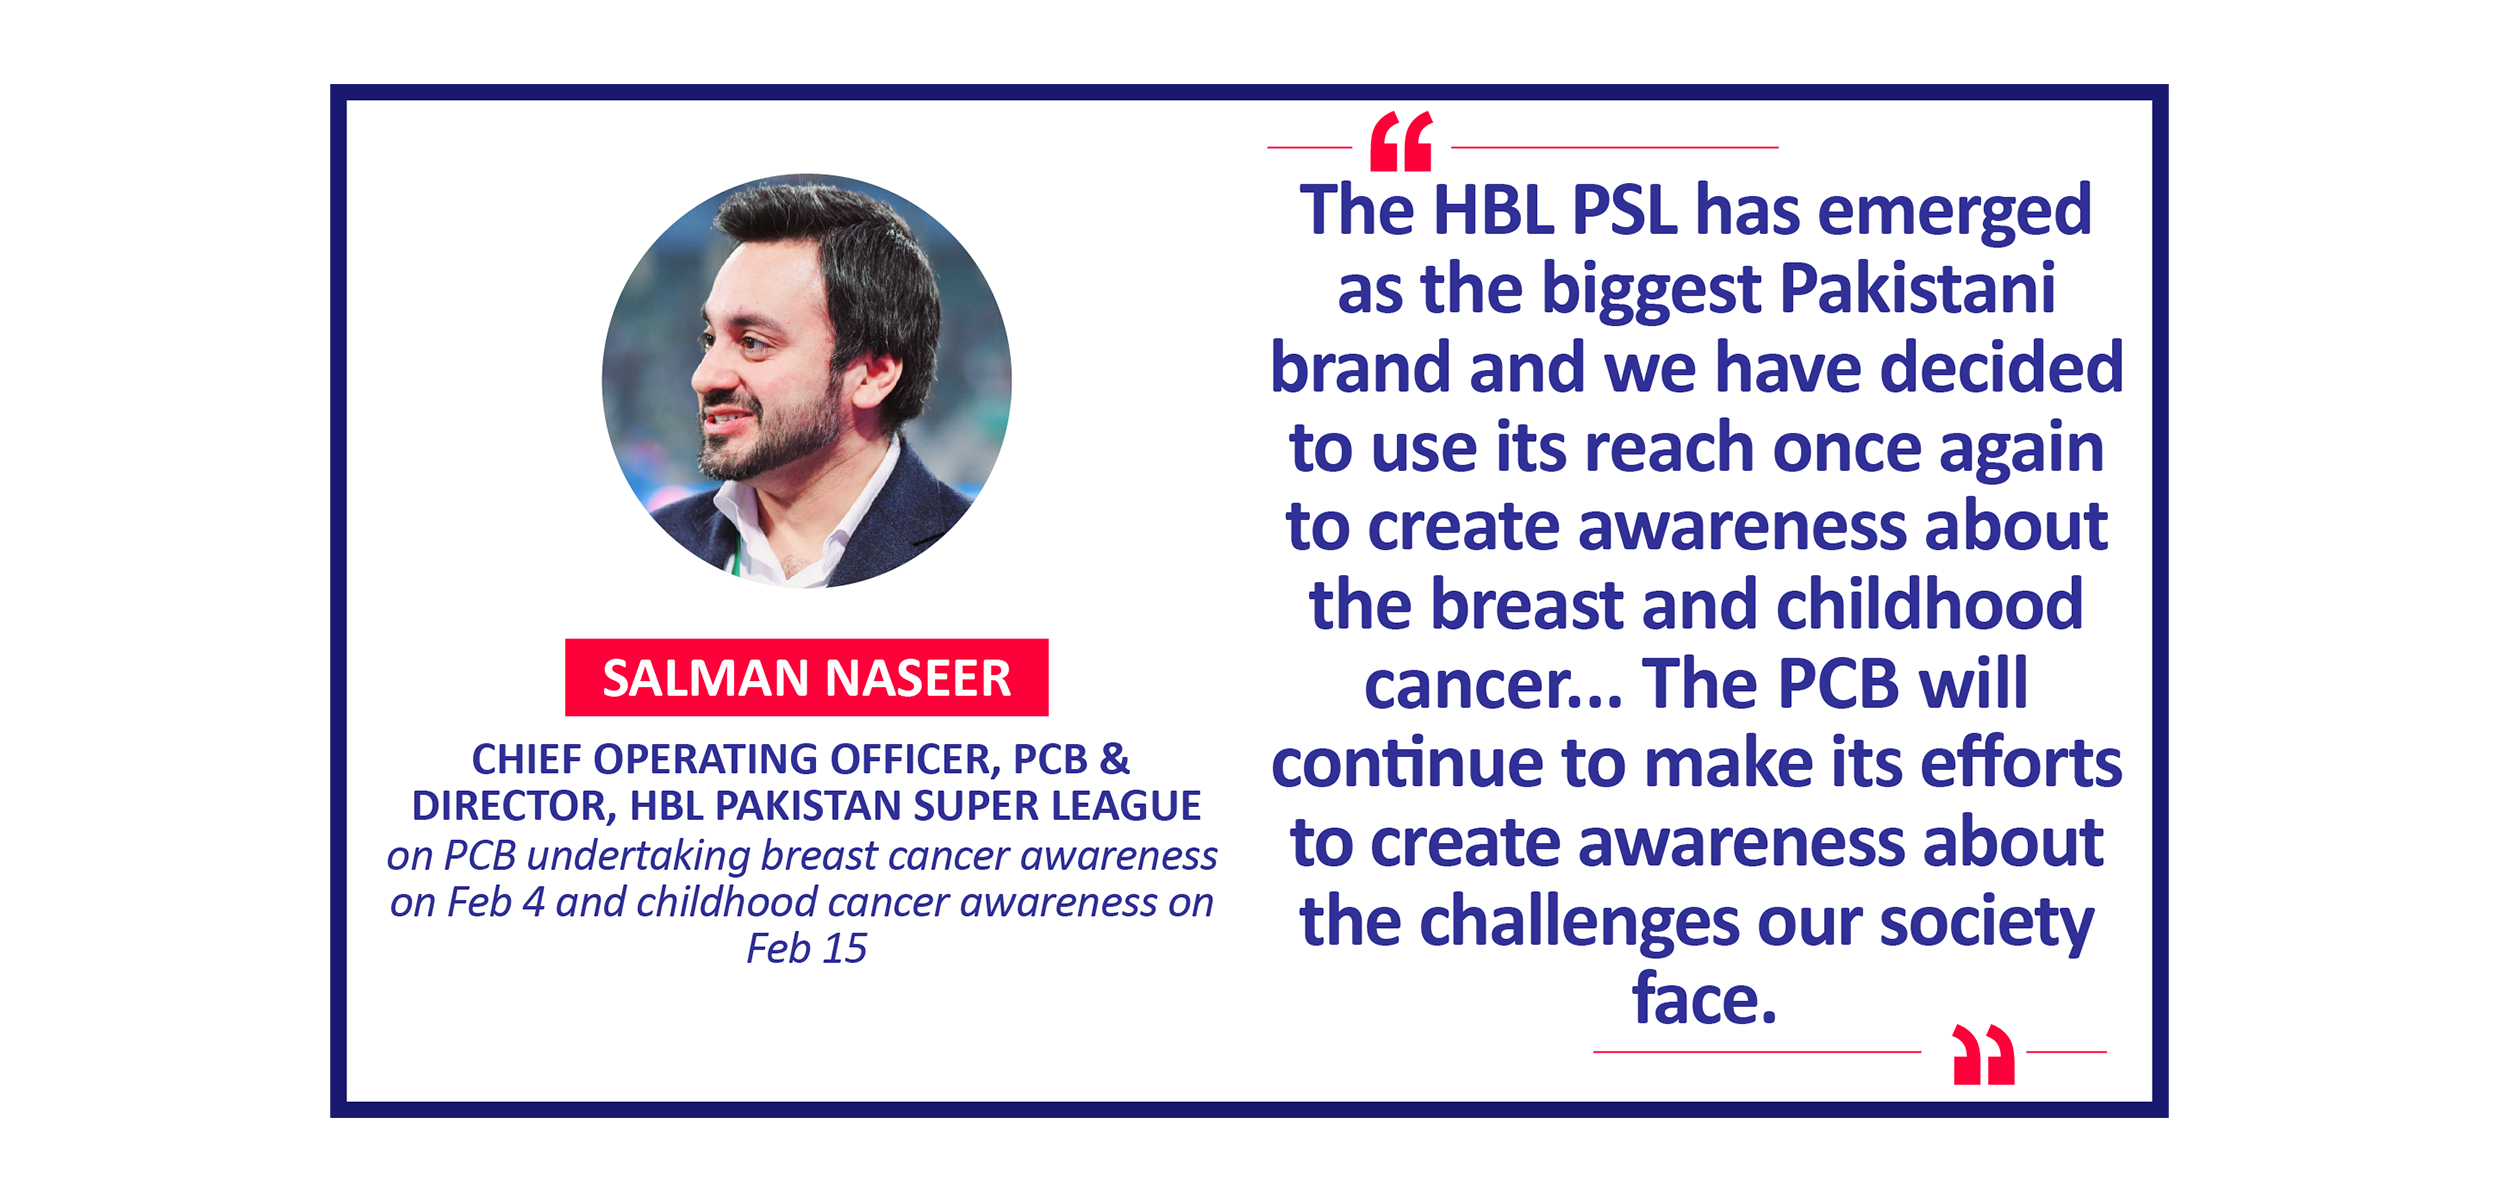 Salman Naseer, Chief Operating Officer, PCB & Director, HBL Pakistan Super League on PCB undertaking breast cancer awareness on Feb 4 and childhood cancer awareness on Feb 15